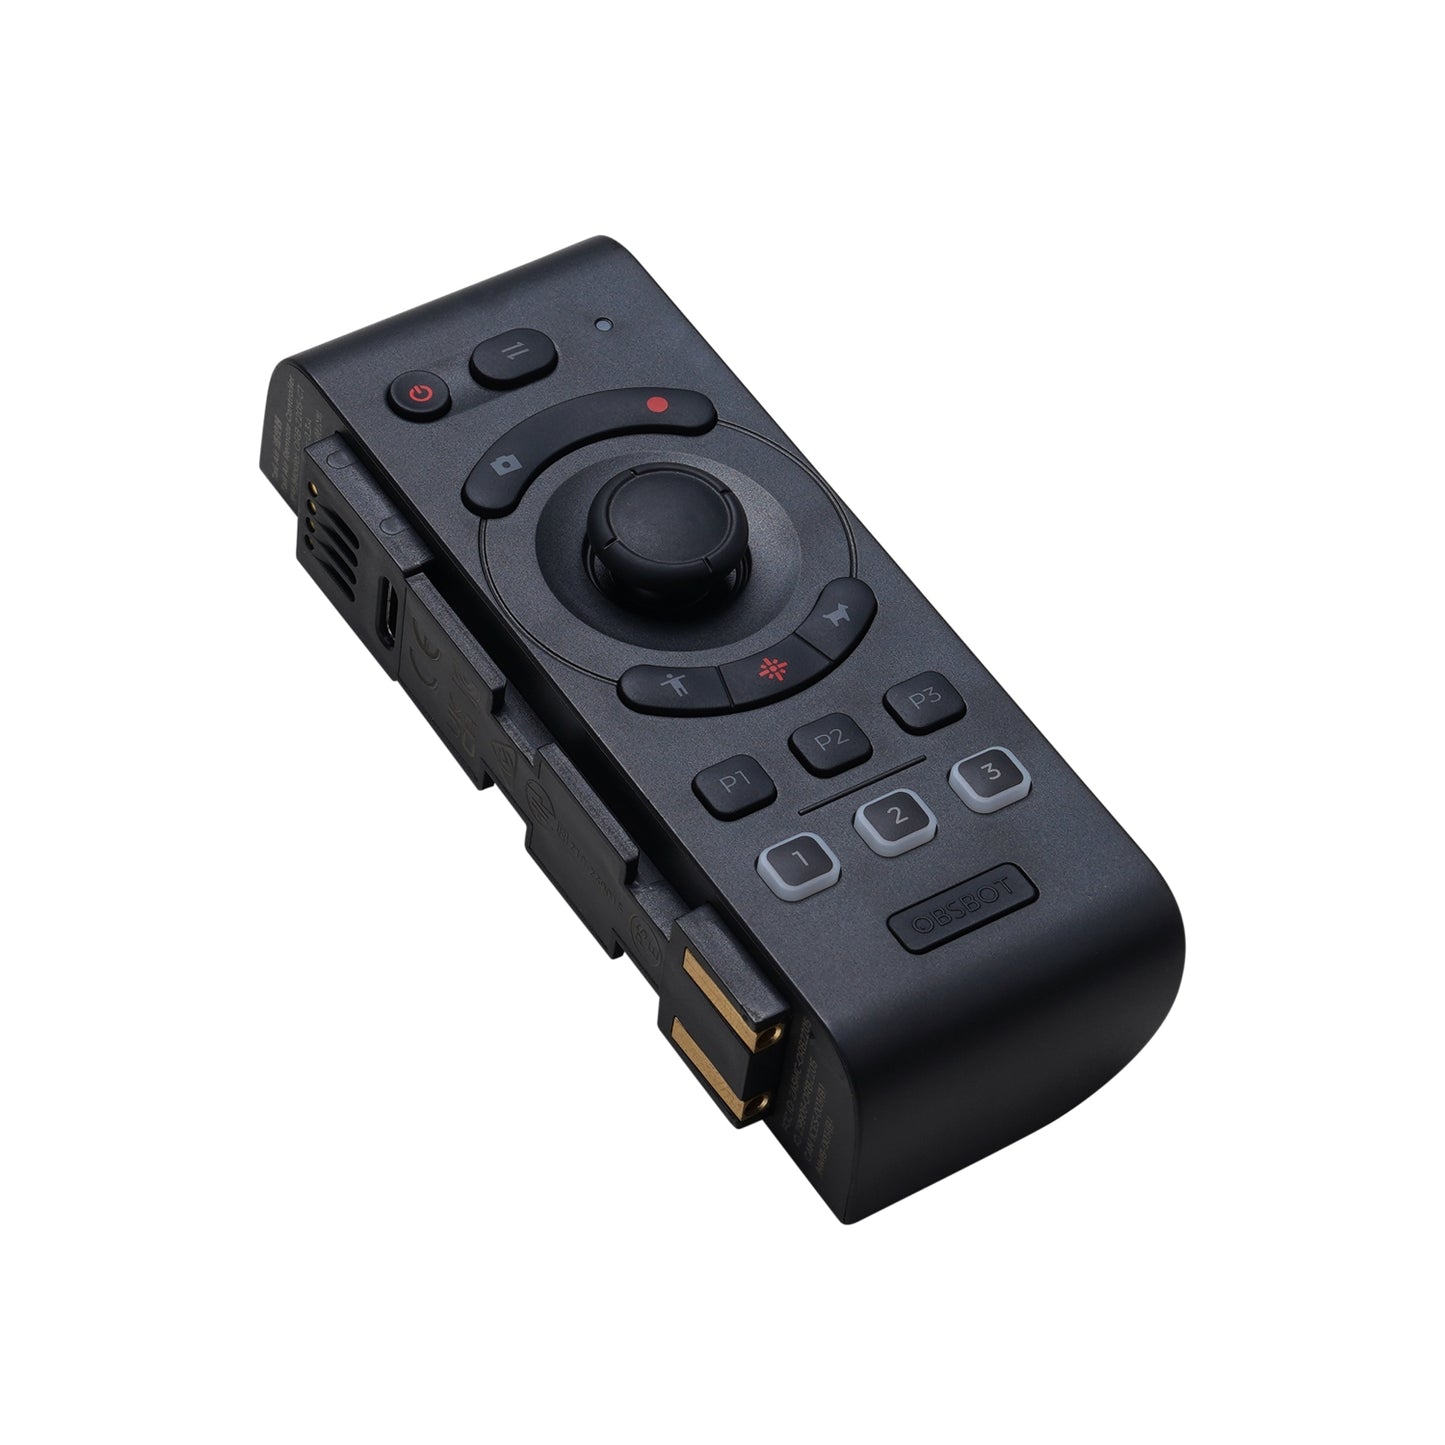 OBSBOT Tail Air Smart Remote controller